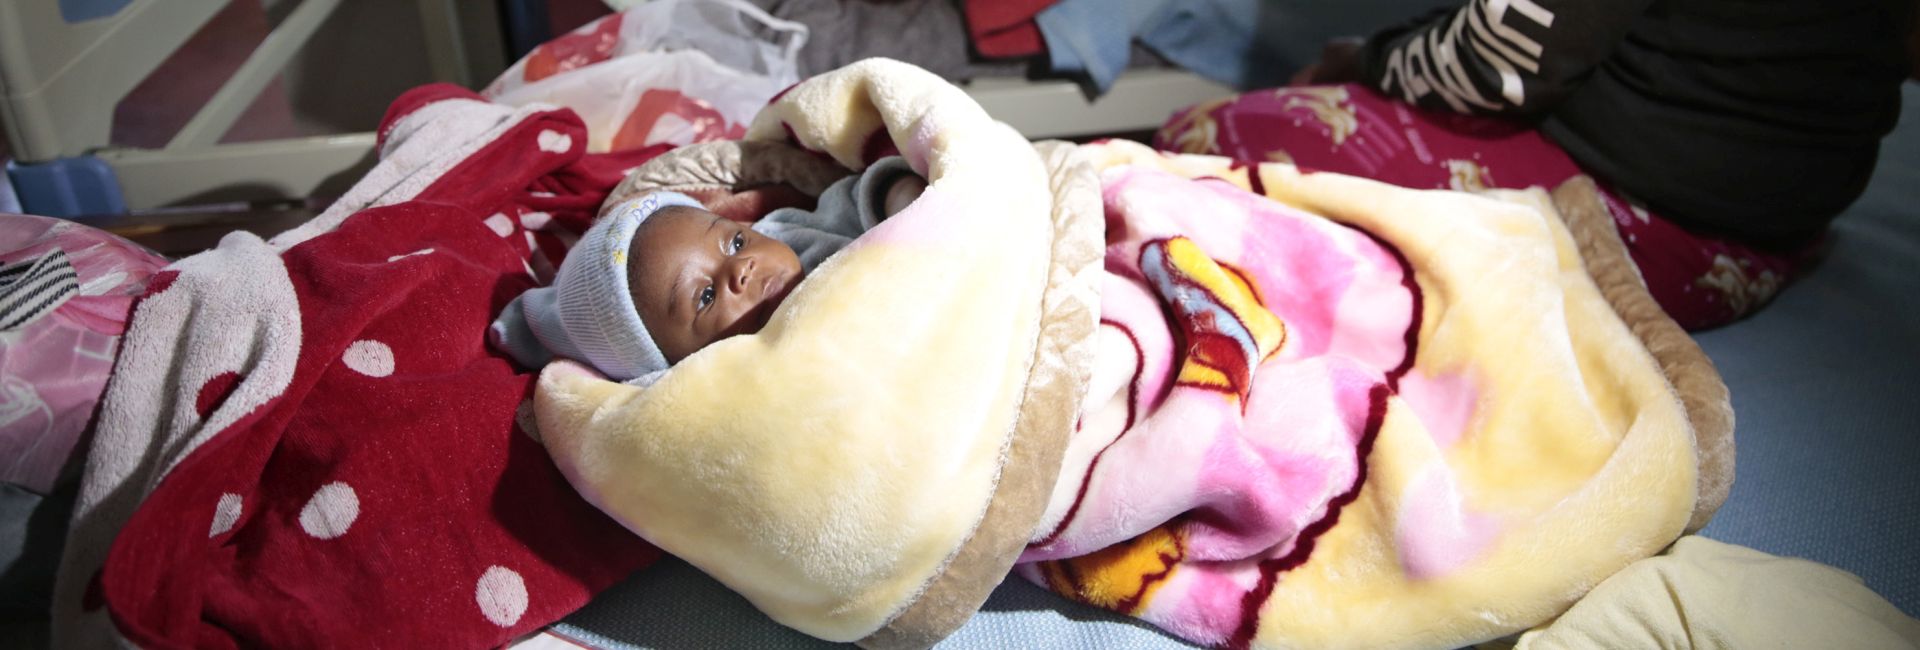 epa07151567 Three month old baby Klavan Munyisa (front) escaped without any injuries while her mother behind was slightly injured and is treated in the Rusape General Hospital  after the collision of two long distance buses in Rusape, some 170 kilometers east of the capital Harare, Zimbabwe, on 07 November 2018. Reportedly at least 47 people died and several others were injured in the bus accident.  EPA/AARON UFUMELI